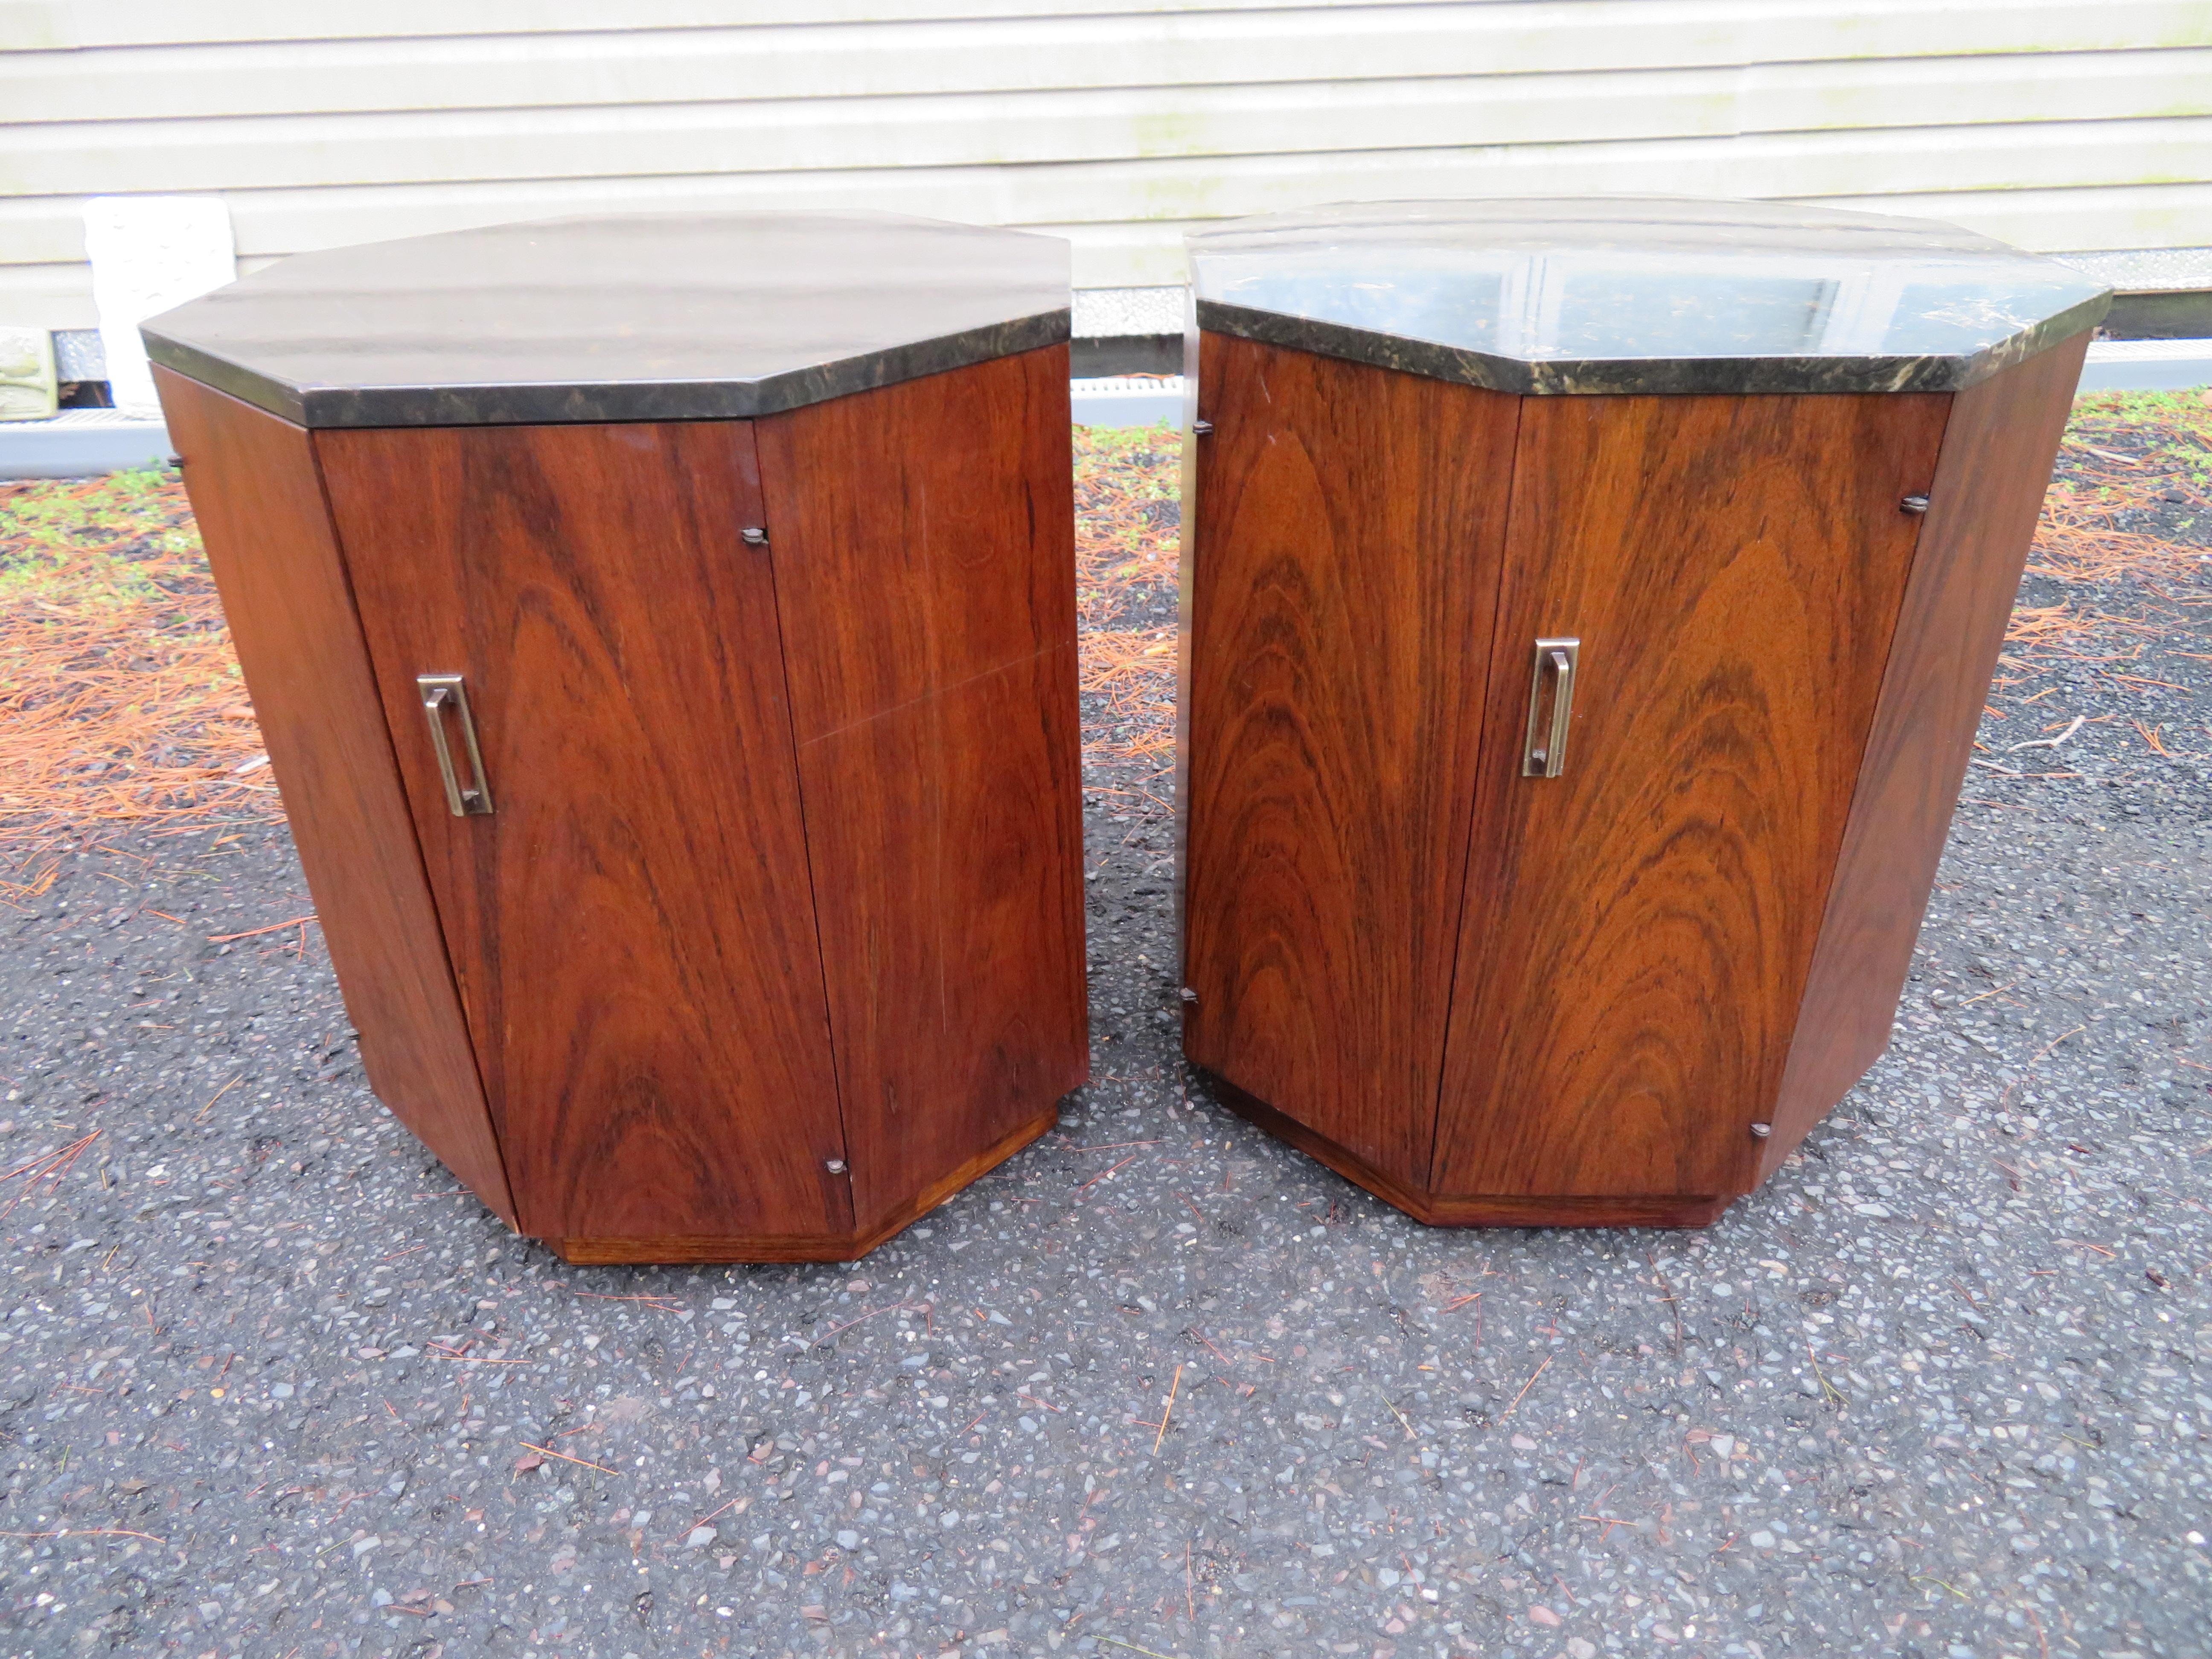 Handsome pair of Harvey Probber style octagon-shaped drum tables with hidden storage inside.    These are very similar to the much-coveted octagon dry bars that Harvey Probber designed in the 60's.  We believe these were made by the Lane Furniture